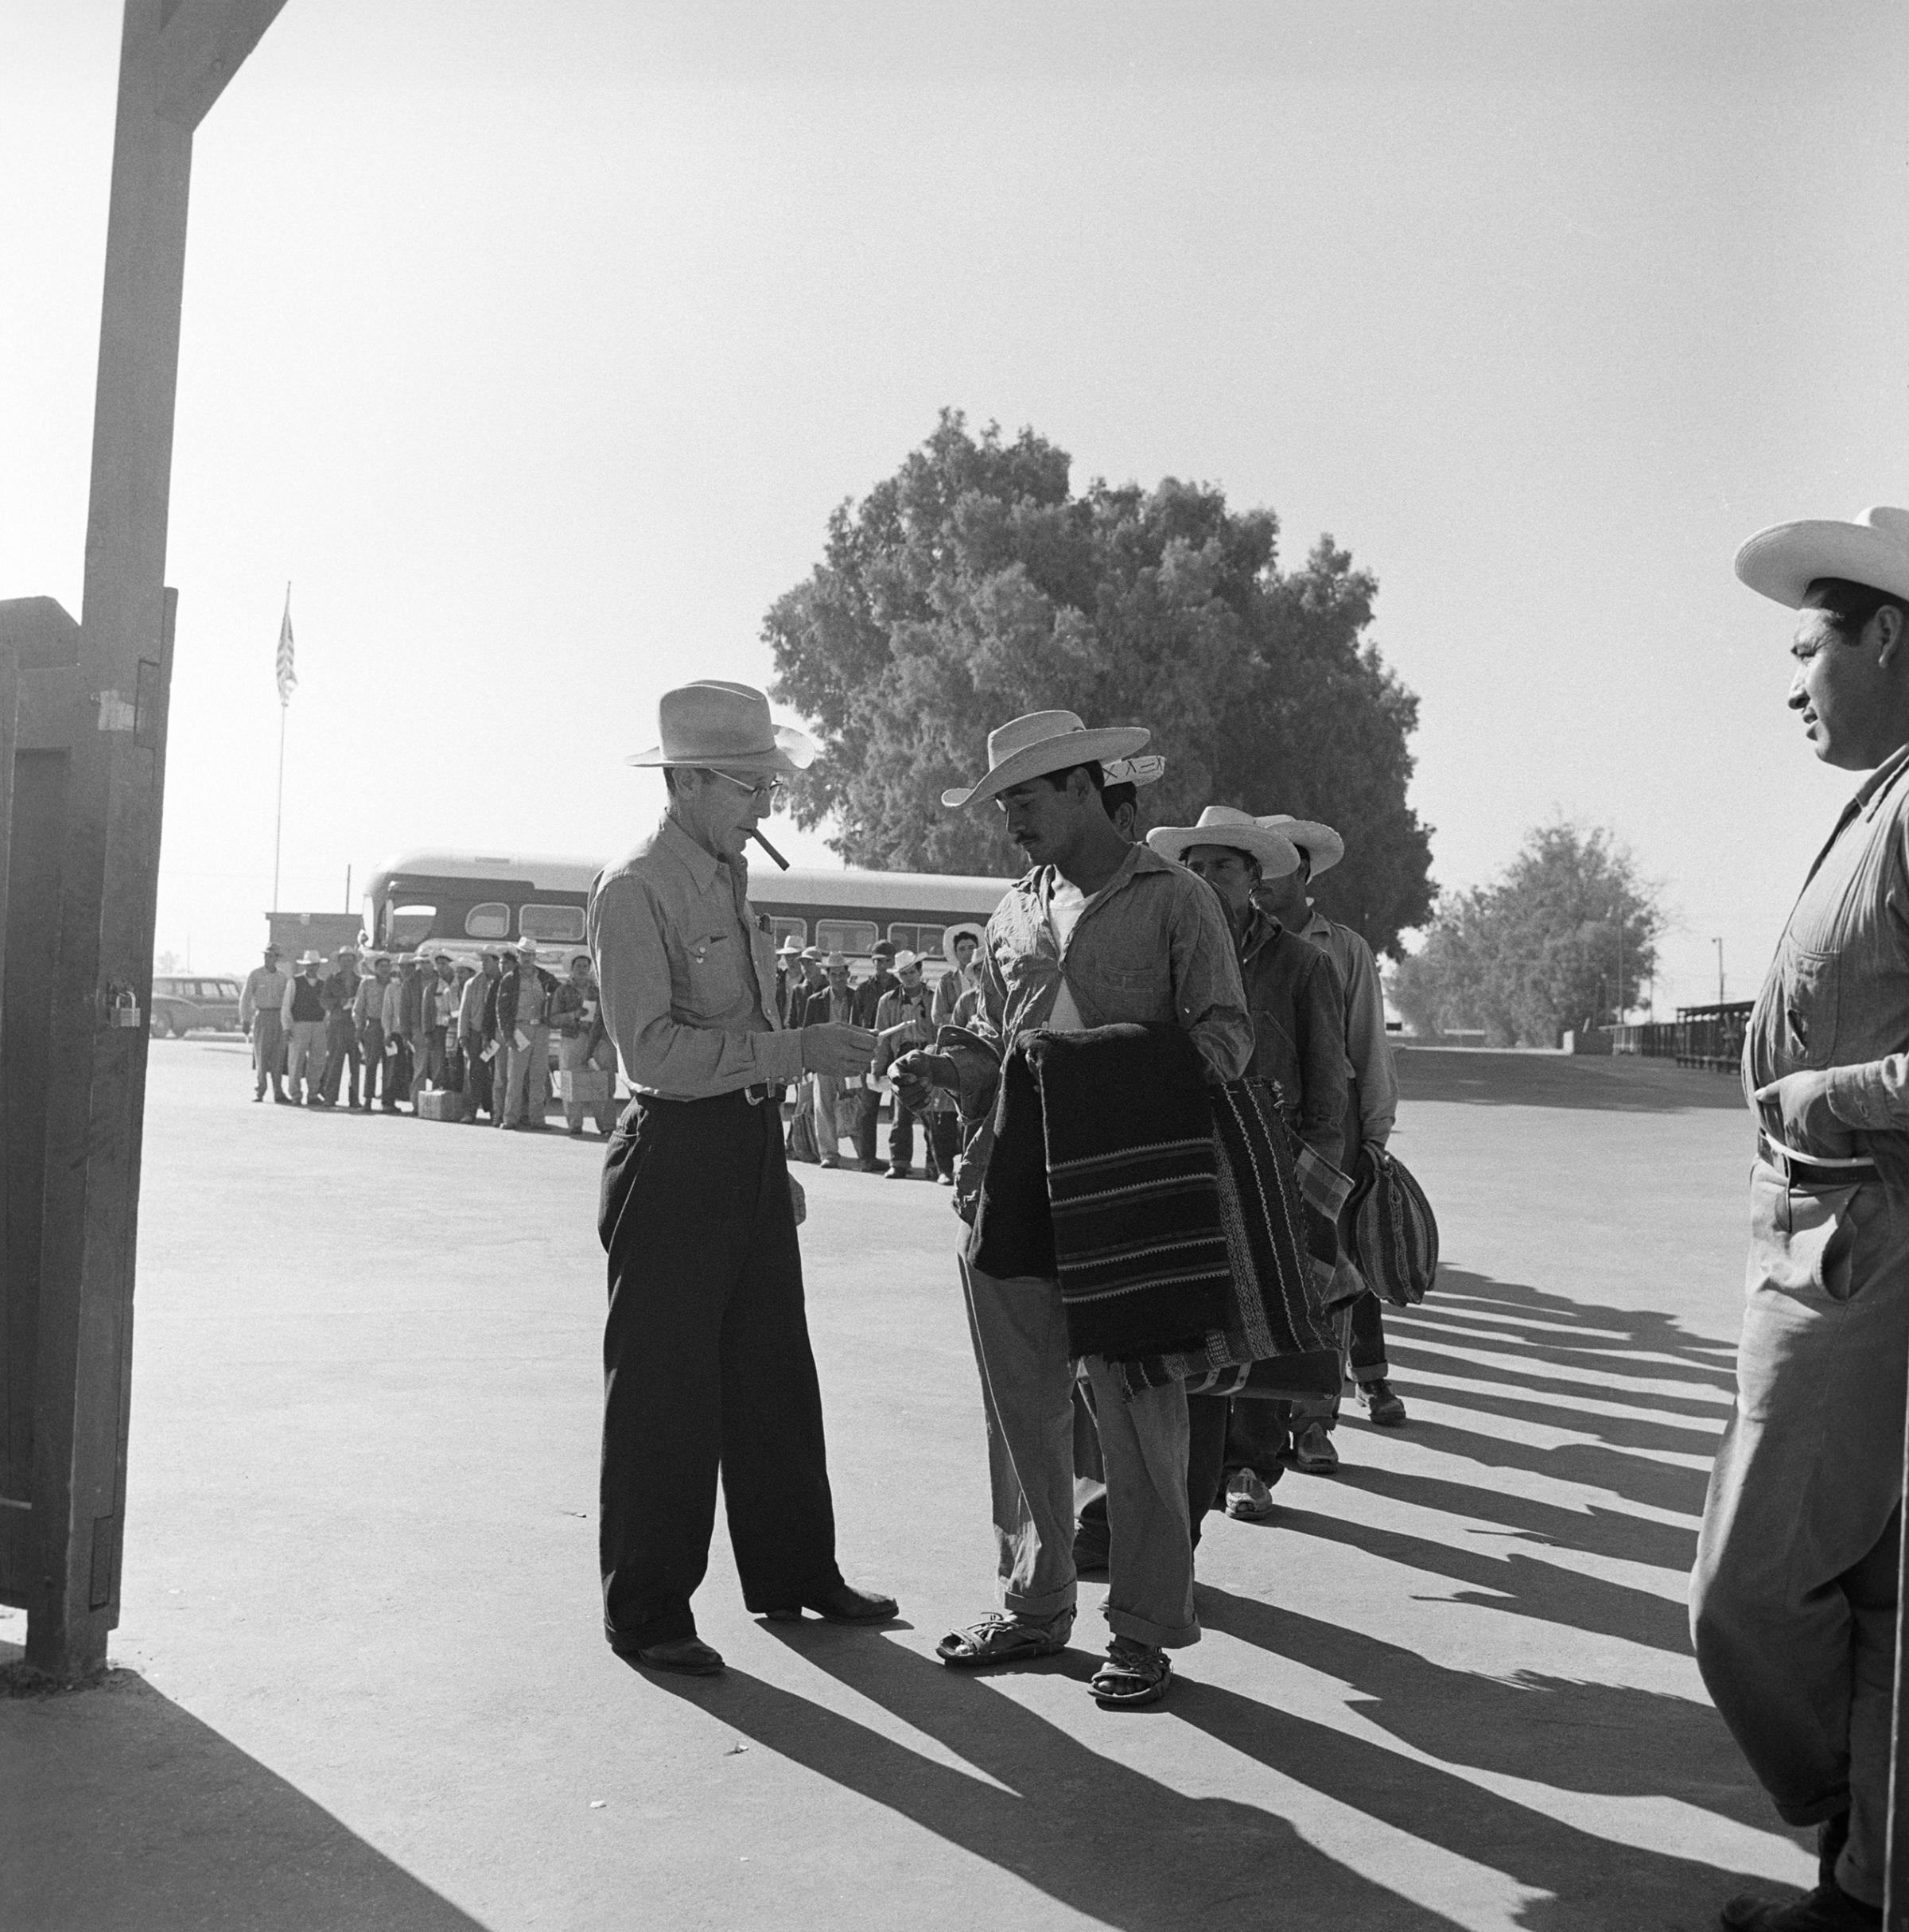 Mexican laborers show their permission to work papers as they arrive at a recruiting center in California, 1957.